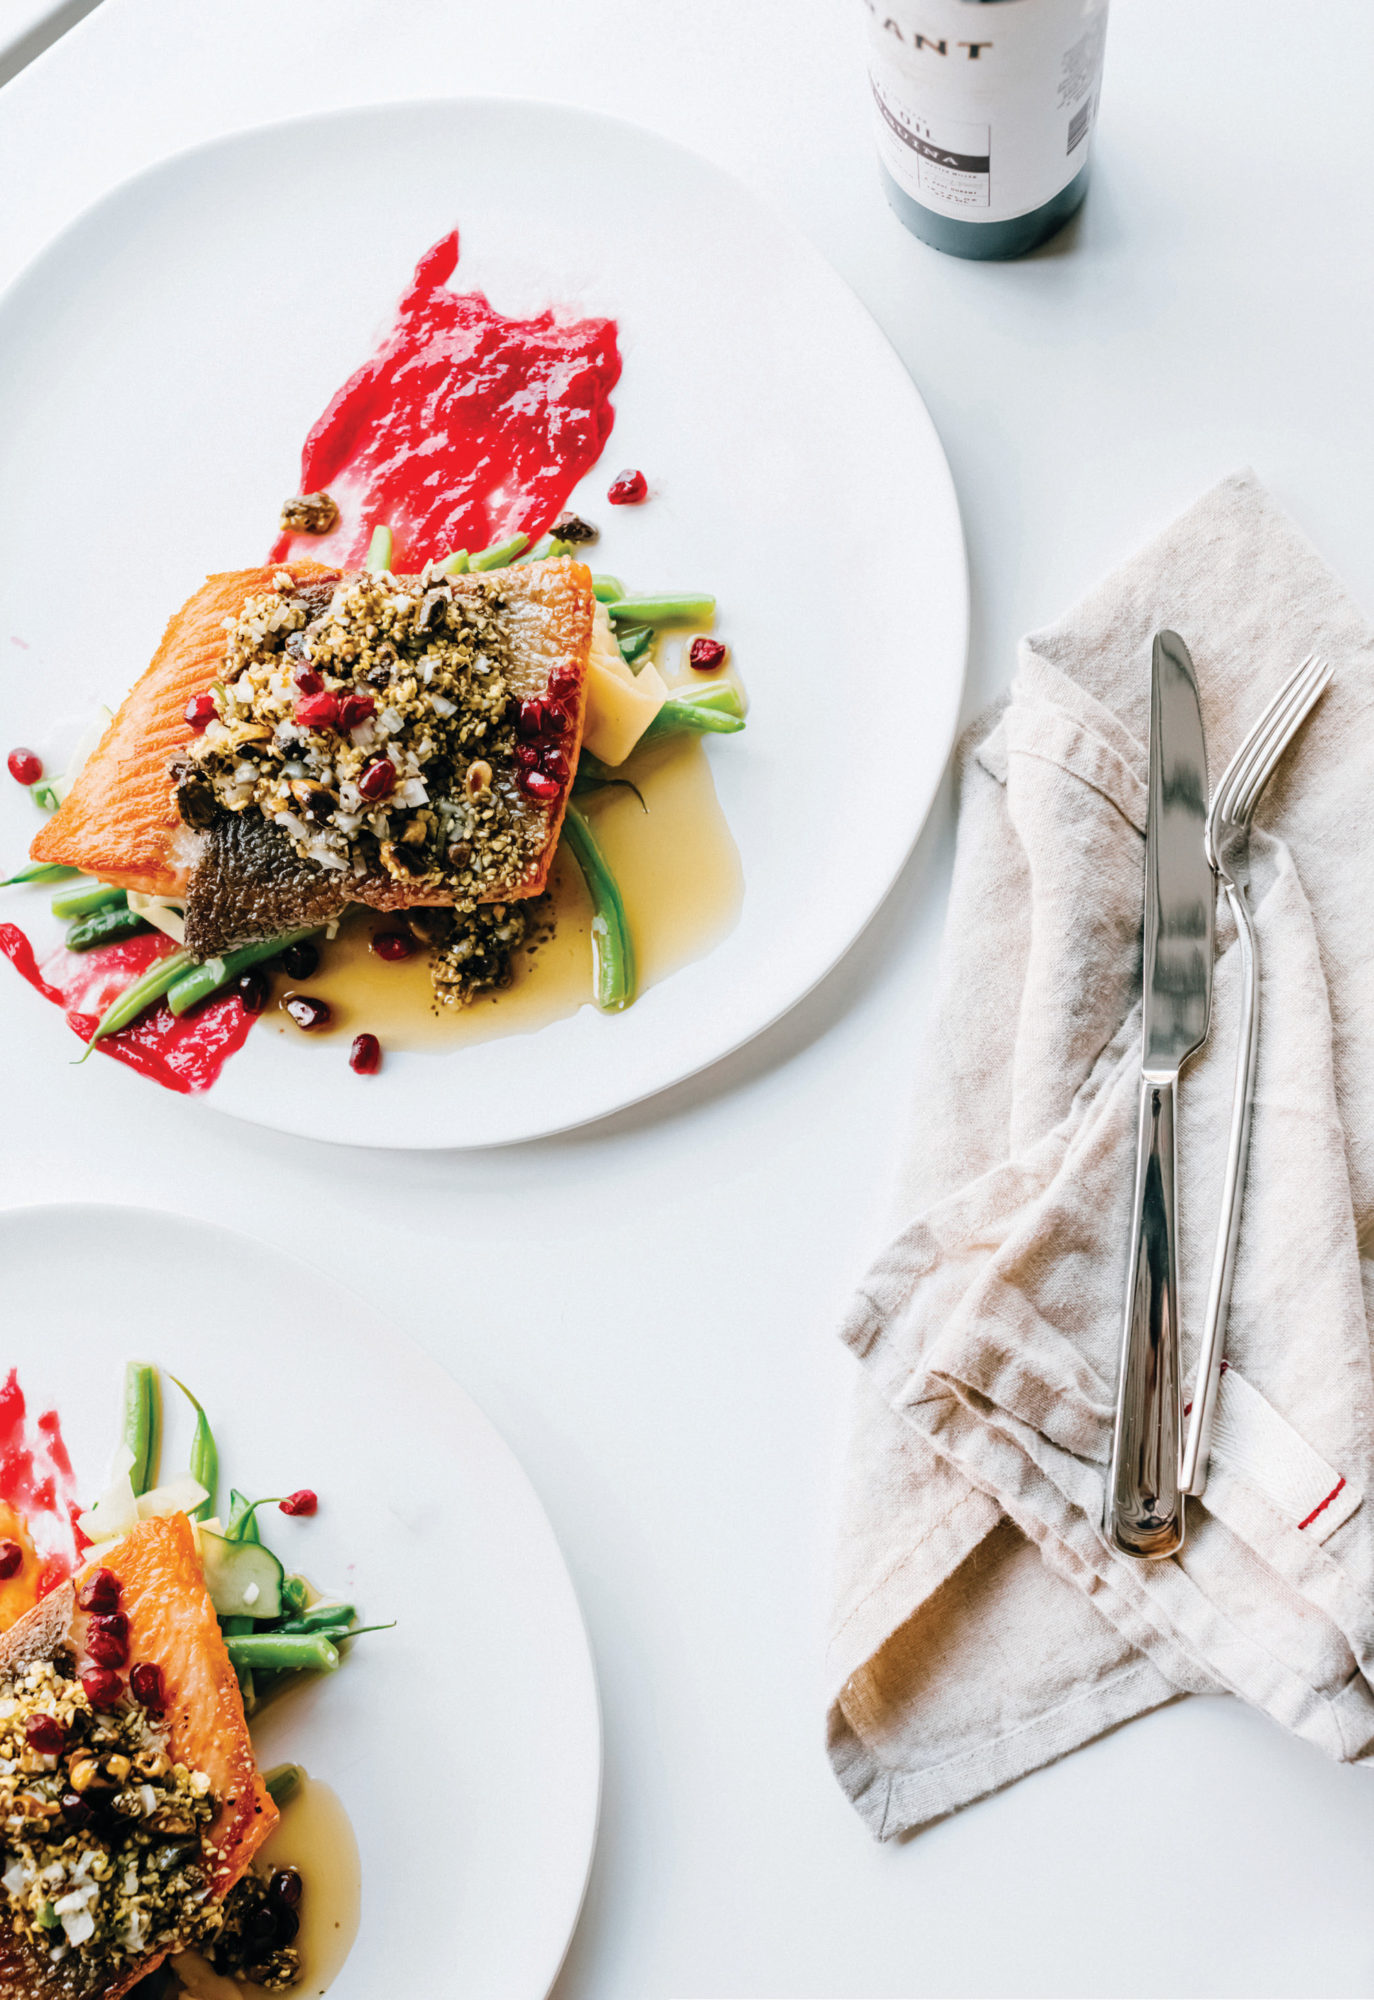 NORR Kitchen’s ocean trout with pole beans, zucchini, pistachio vinaigrette and sweet and sour pomegranate.